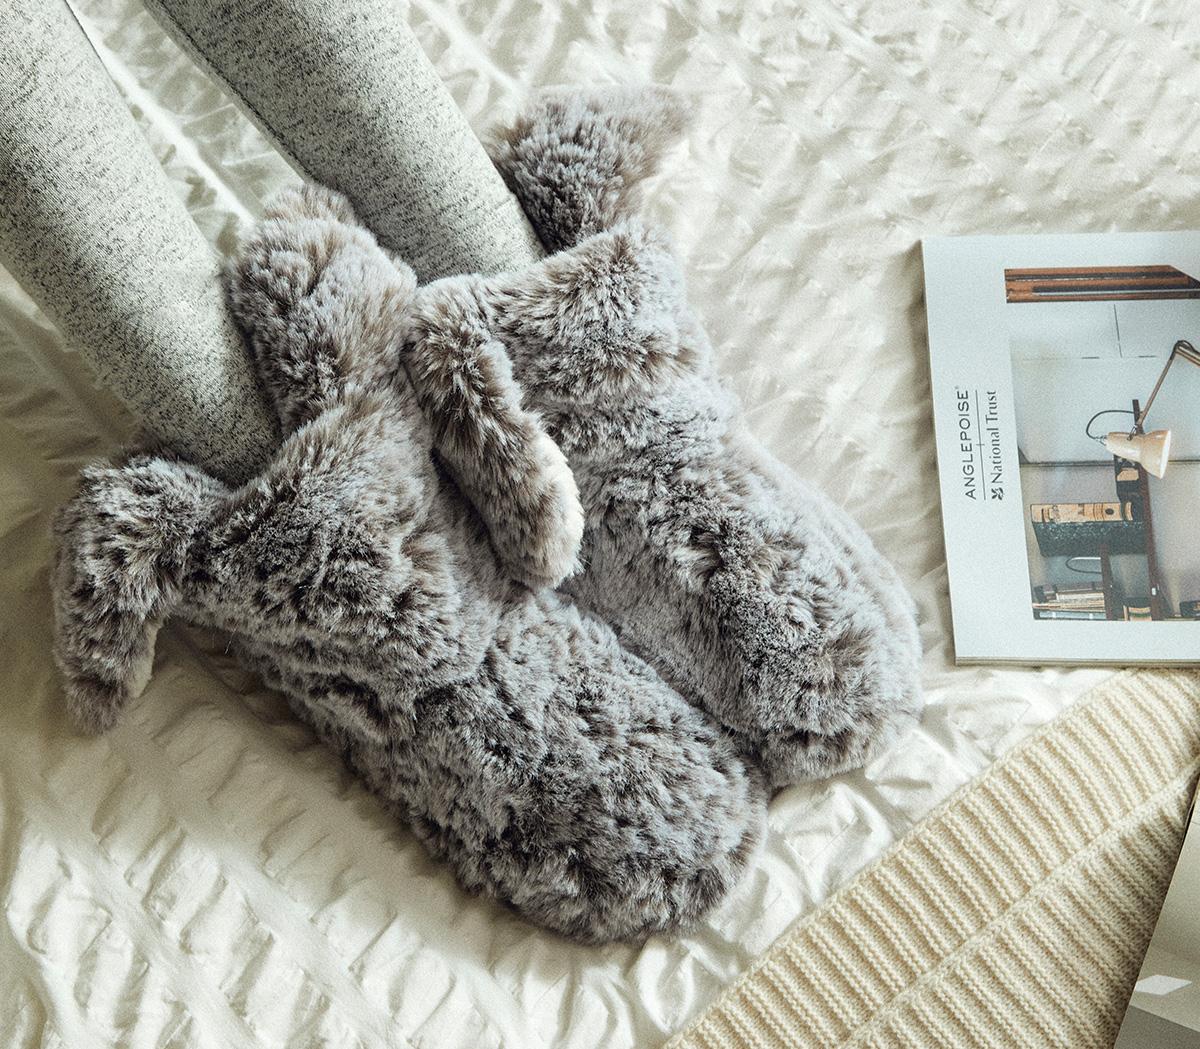 Super Cosy Bunny Slippers